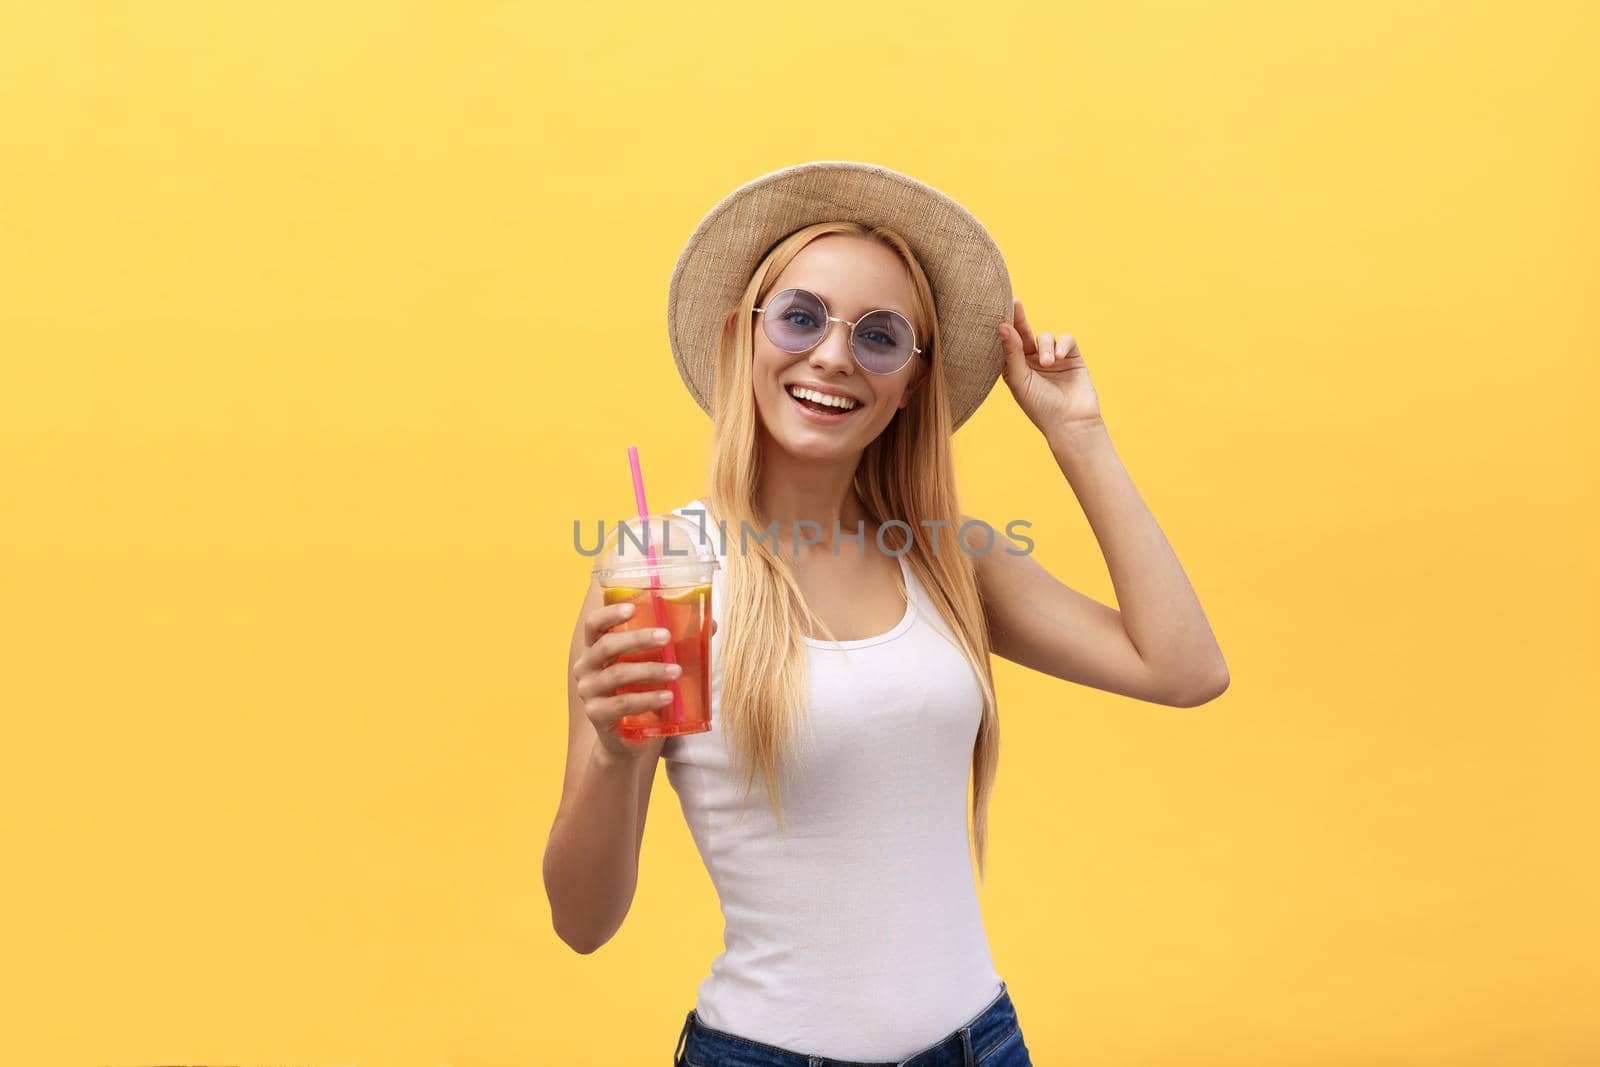 Happy stylish modern woman with modern shaped sunglasses laughing looking at you camera isolated on yellow background. Happiness concept.